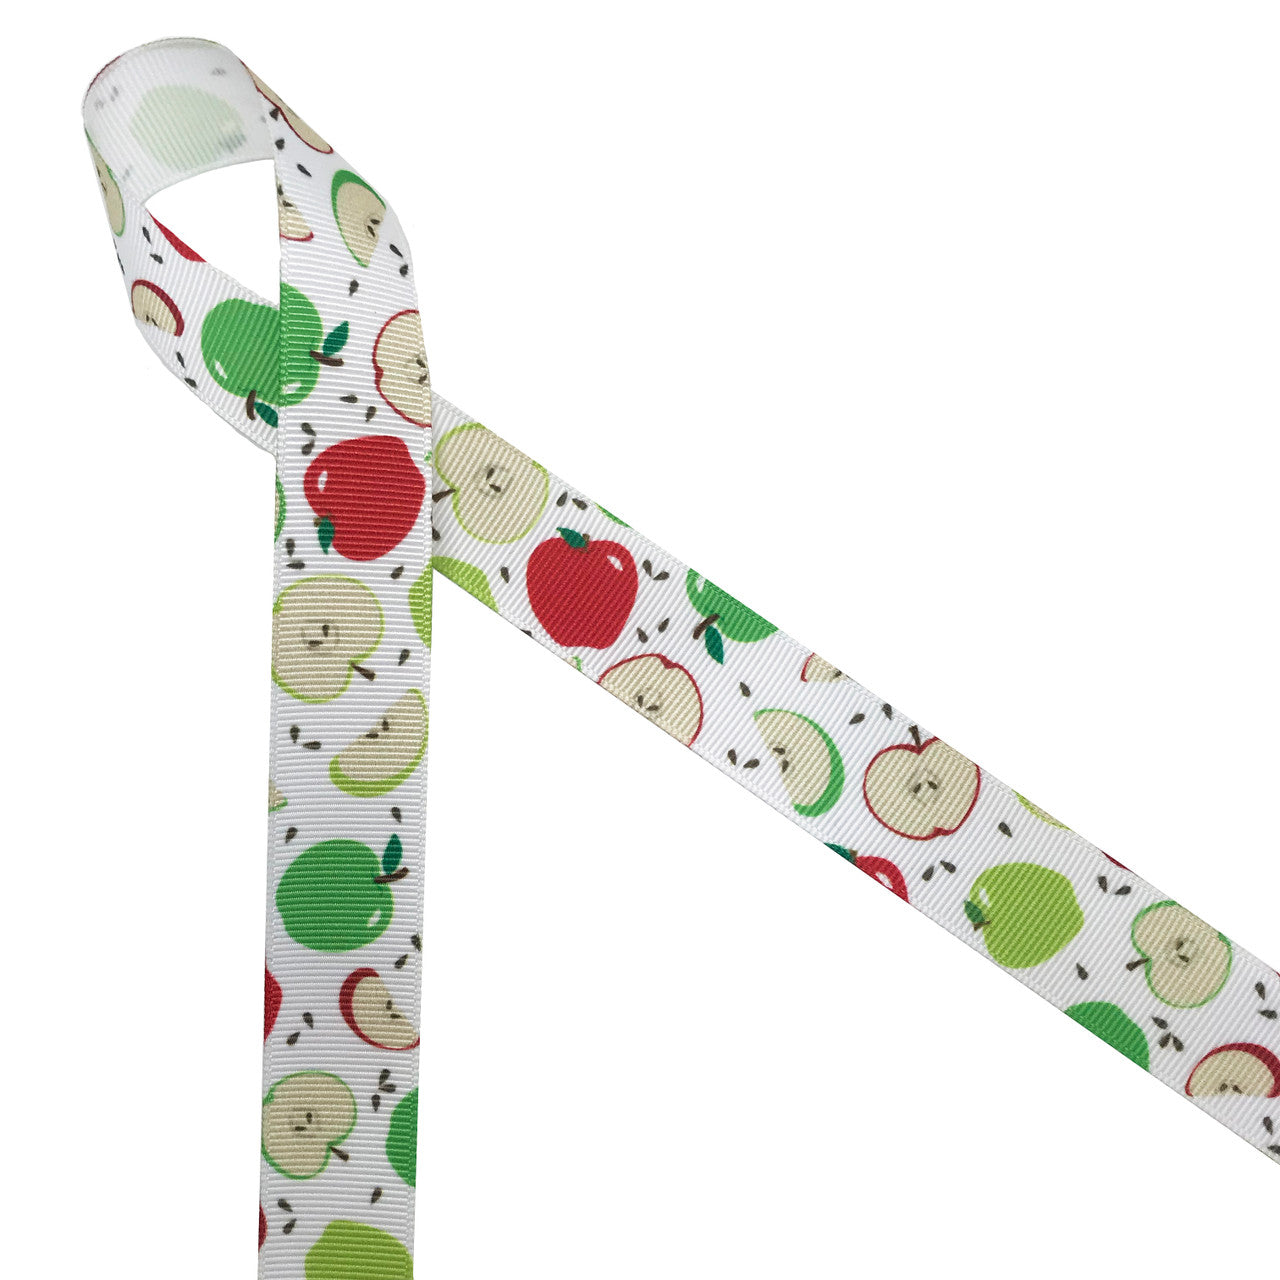 Green and red apples with brown seeds and apple slices printed on 7/8" white grosgrain ribbon is such a fun ribbon for Fall crafting! A great choice for hair bows, scrap booking and more! Designed and printed in the USA